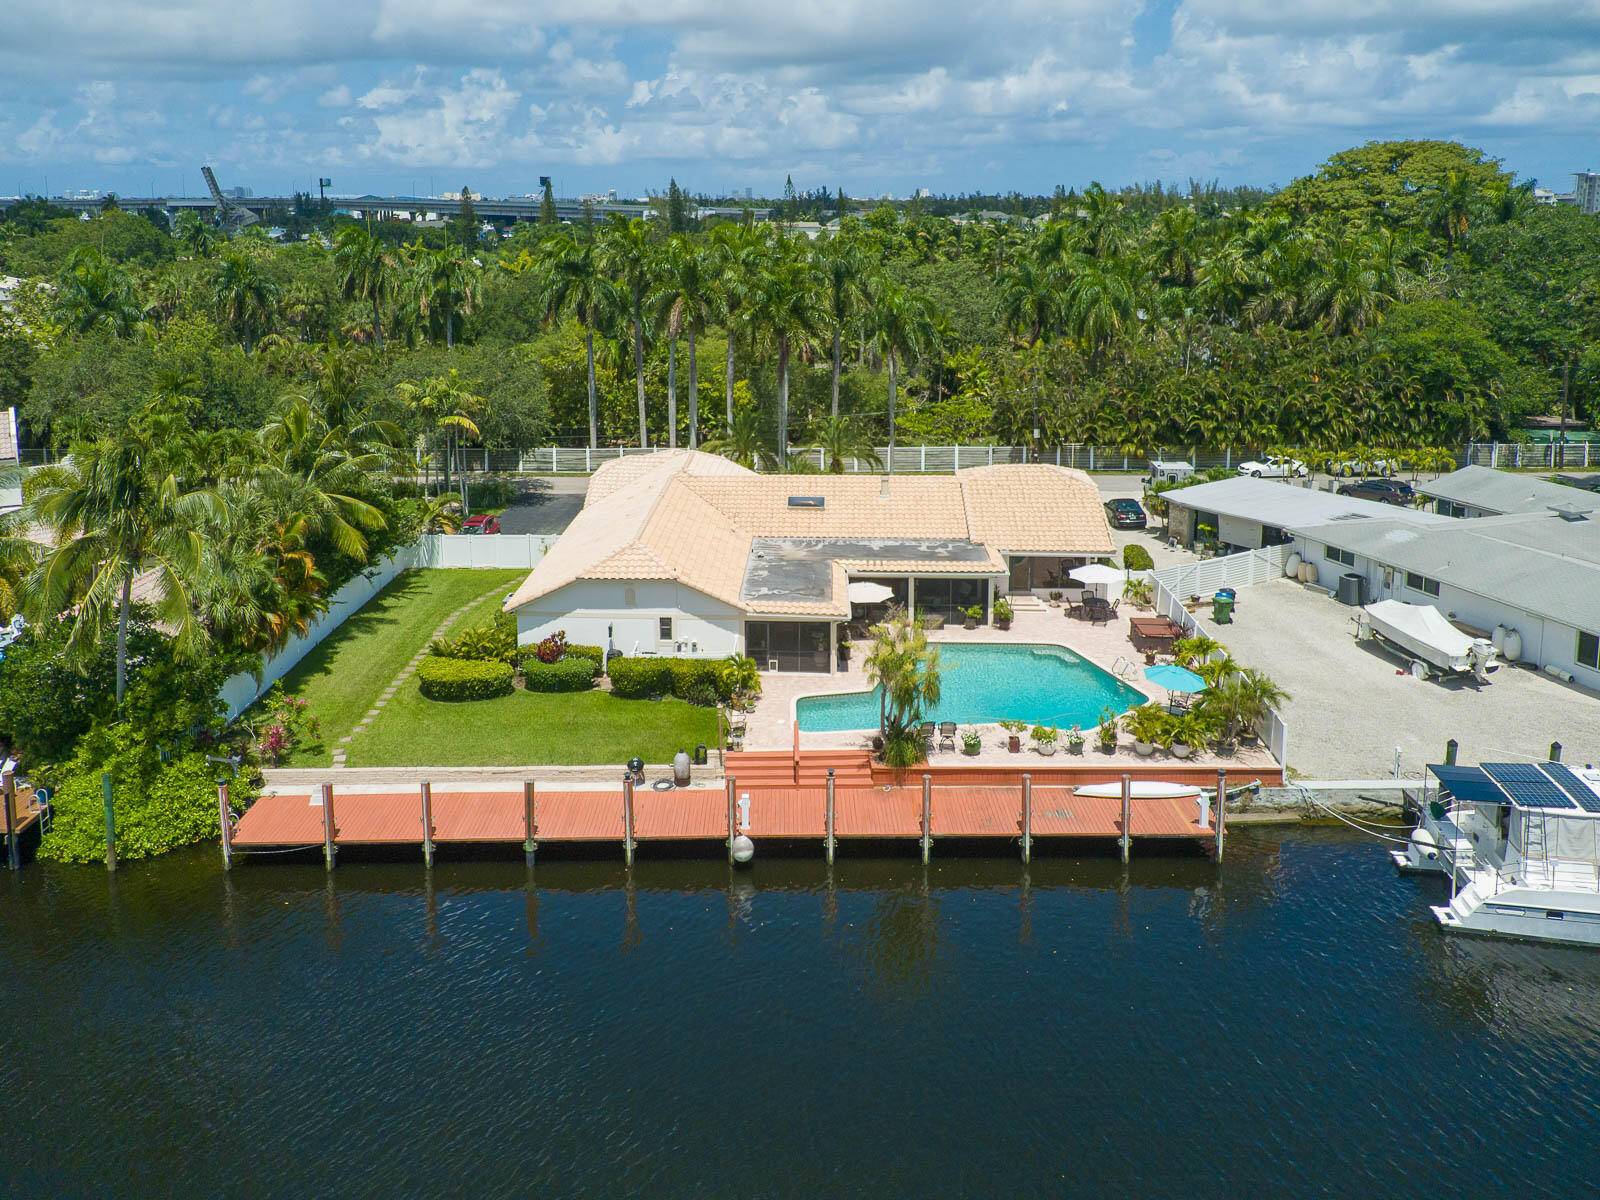 BOATERS PARADISE FOUND ! Luxury residence located in a truly tropical setting along Fort Lauderdale's New River.